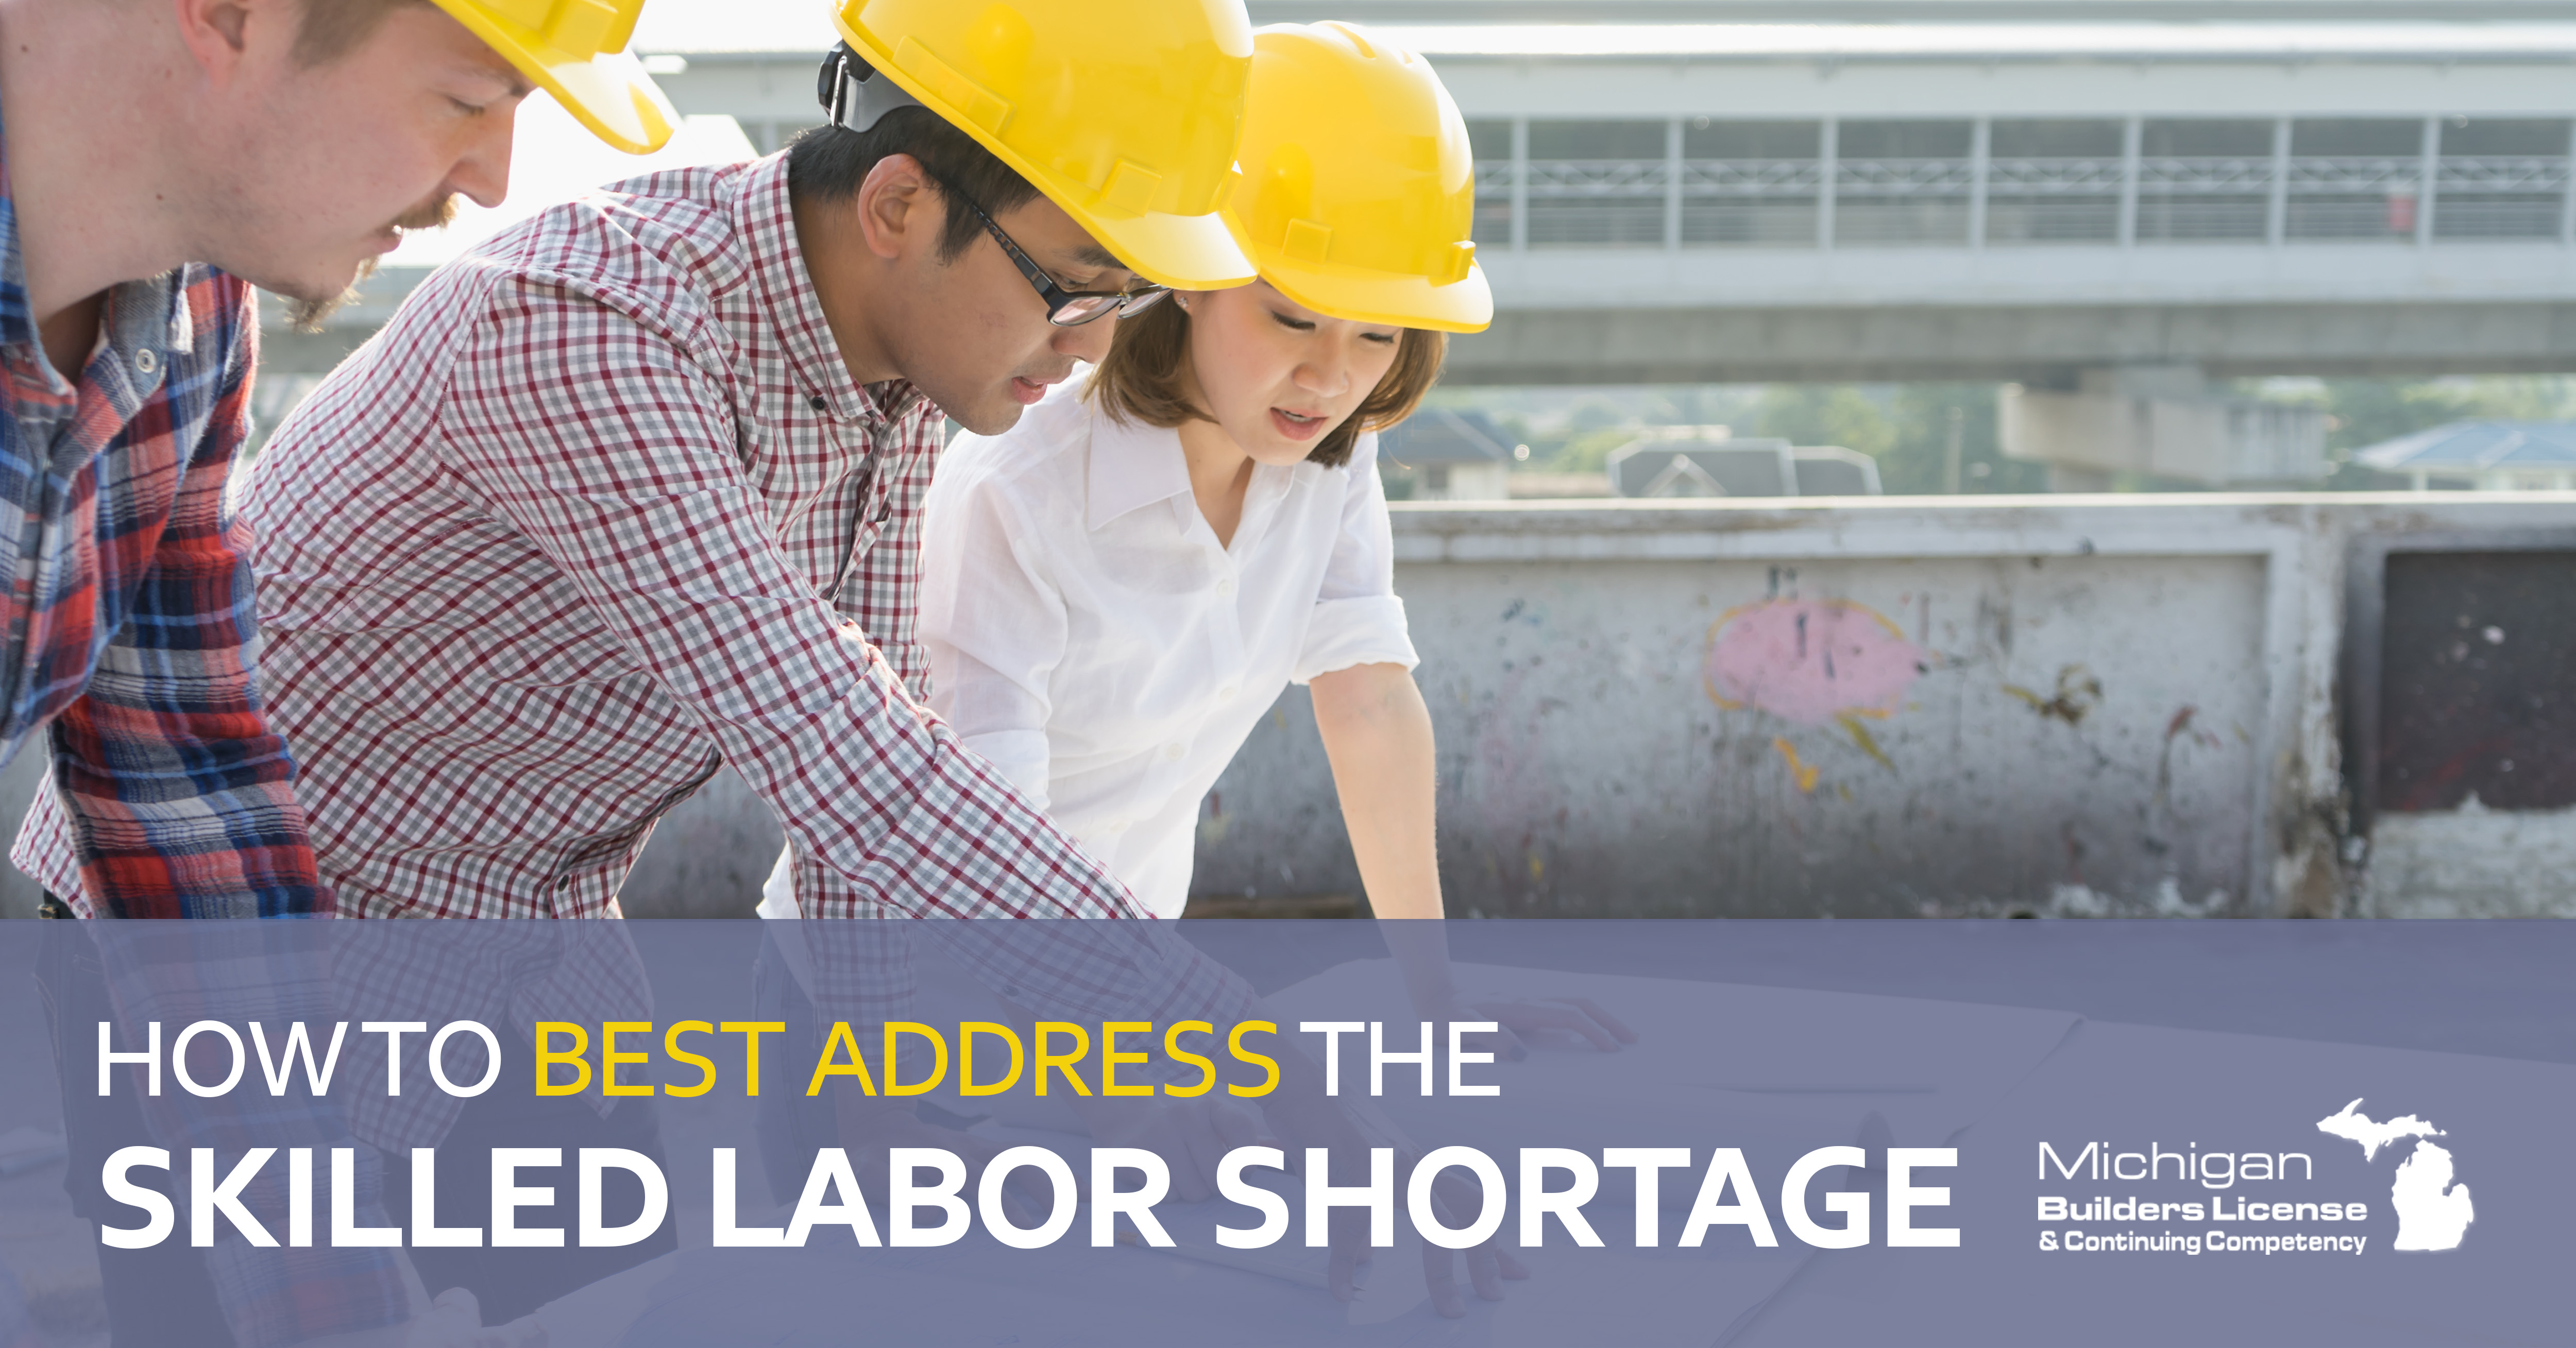 How to Best Address the Skilled Labor Shortage